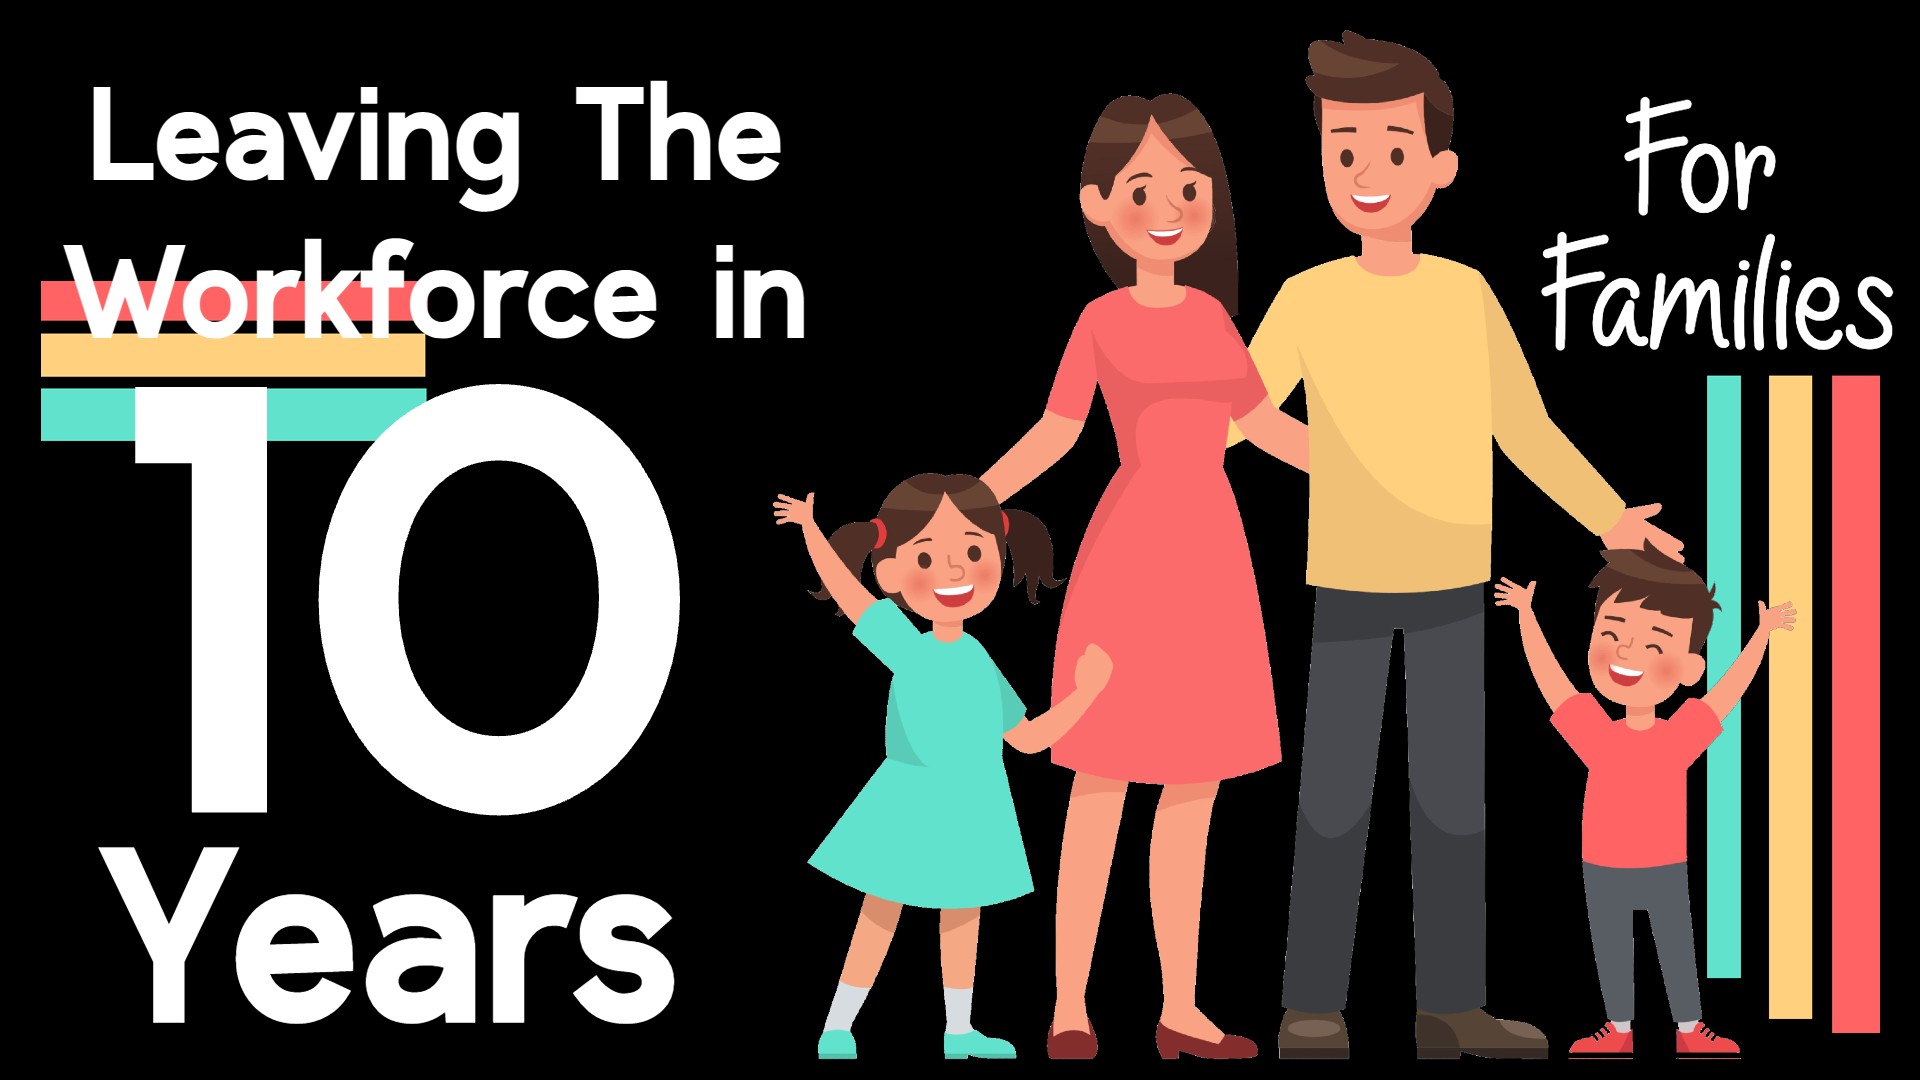 Leaving the Workforce in 10 Years: For Families